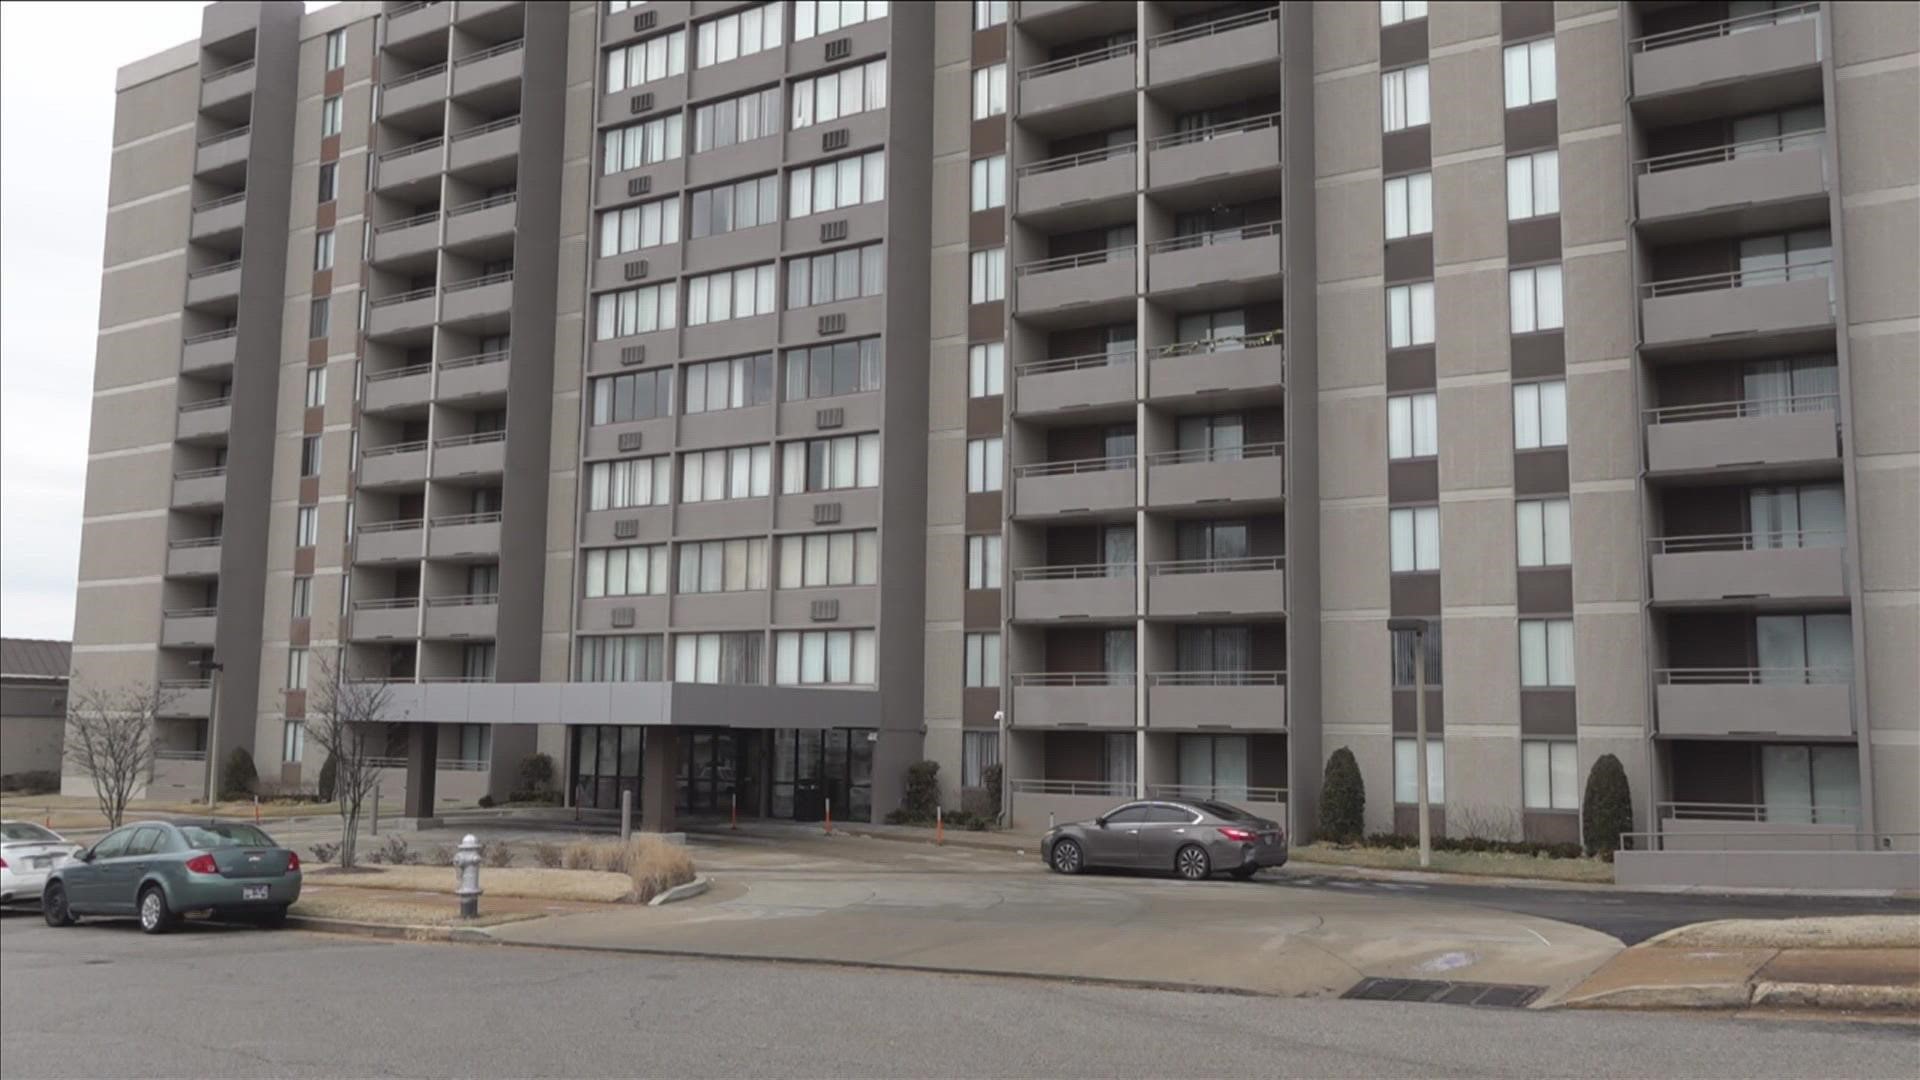 City View Towers residents are just some in the city of Memphis whose concerns have not enacted a response from management while MLGW works with "all hands on deck."